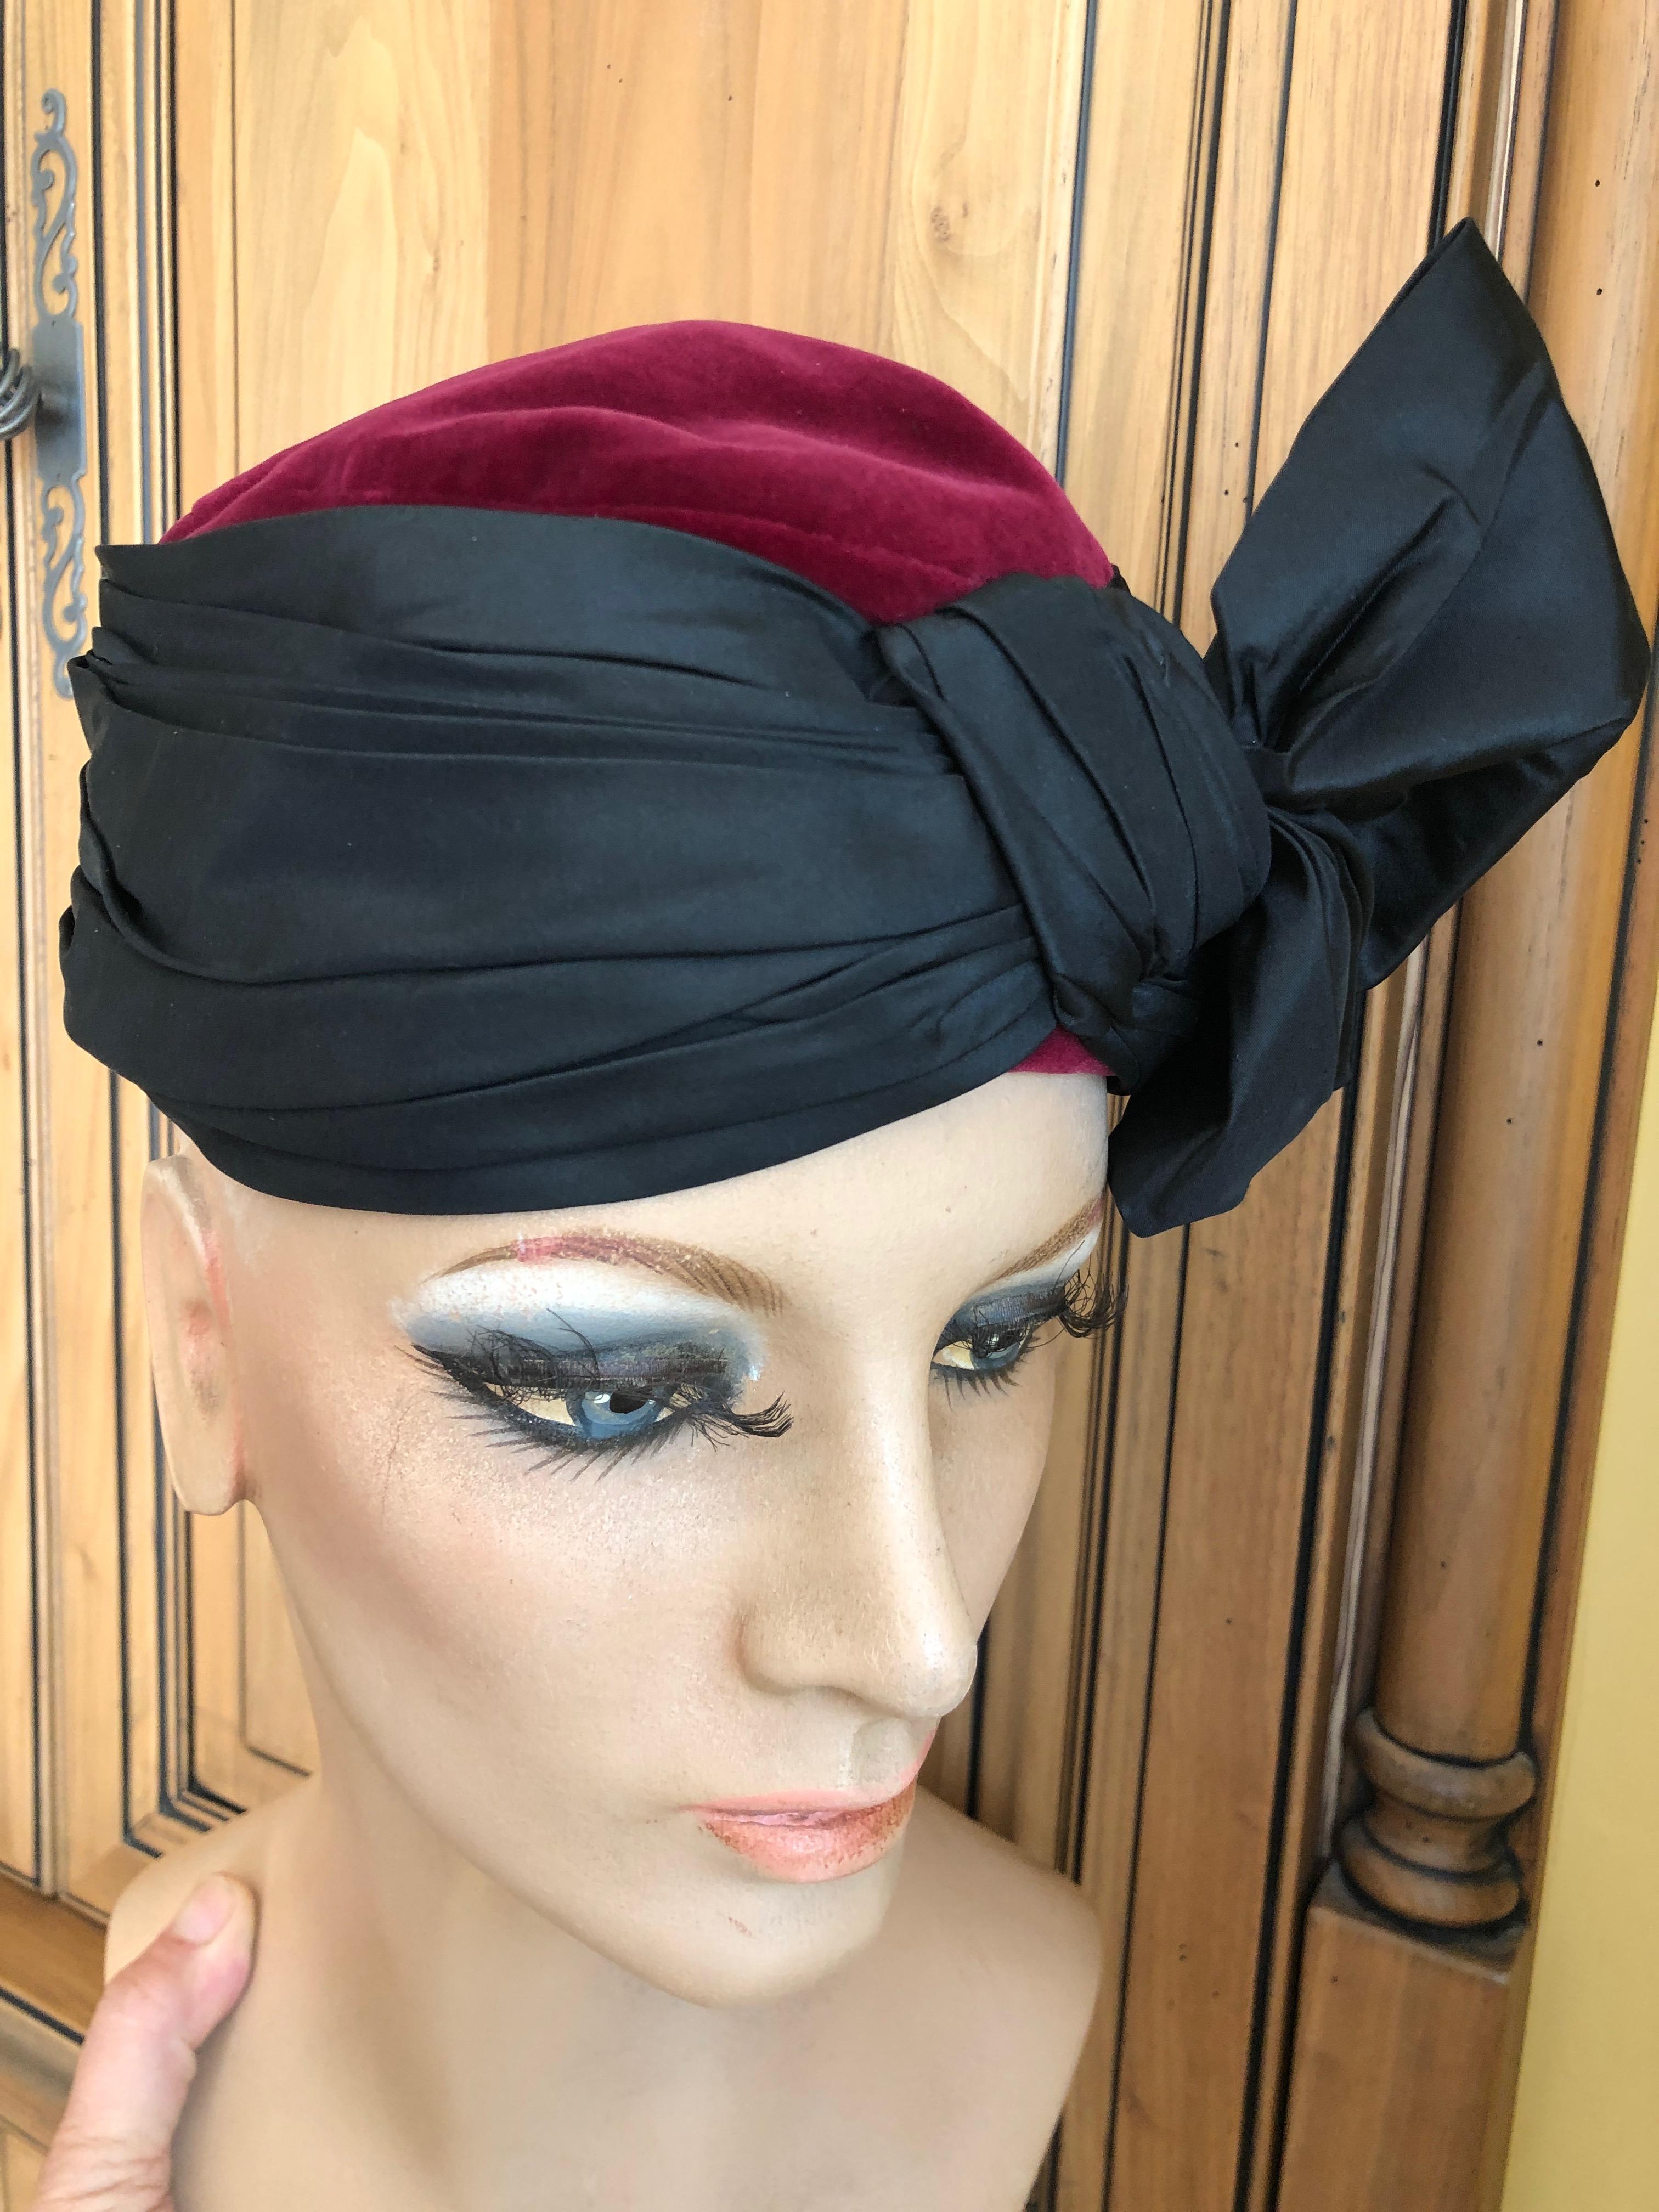 Yves Saint Laurent Rive Guache 70's Velvet Turban with Silk Bow
22.5 inch circumfrence.
In excellent condition